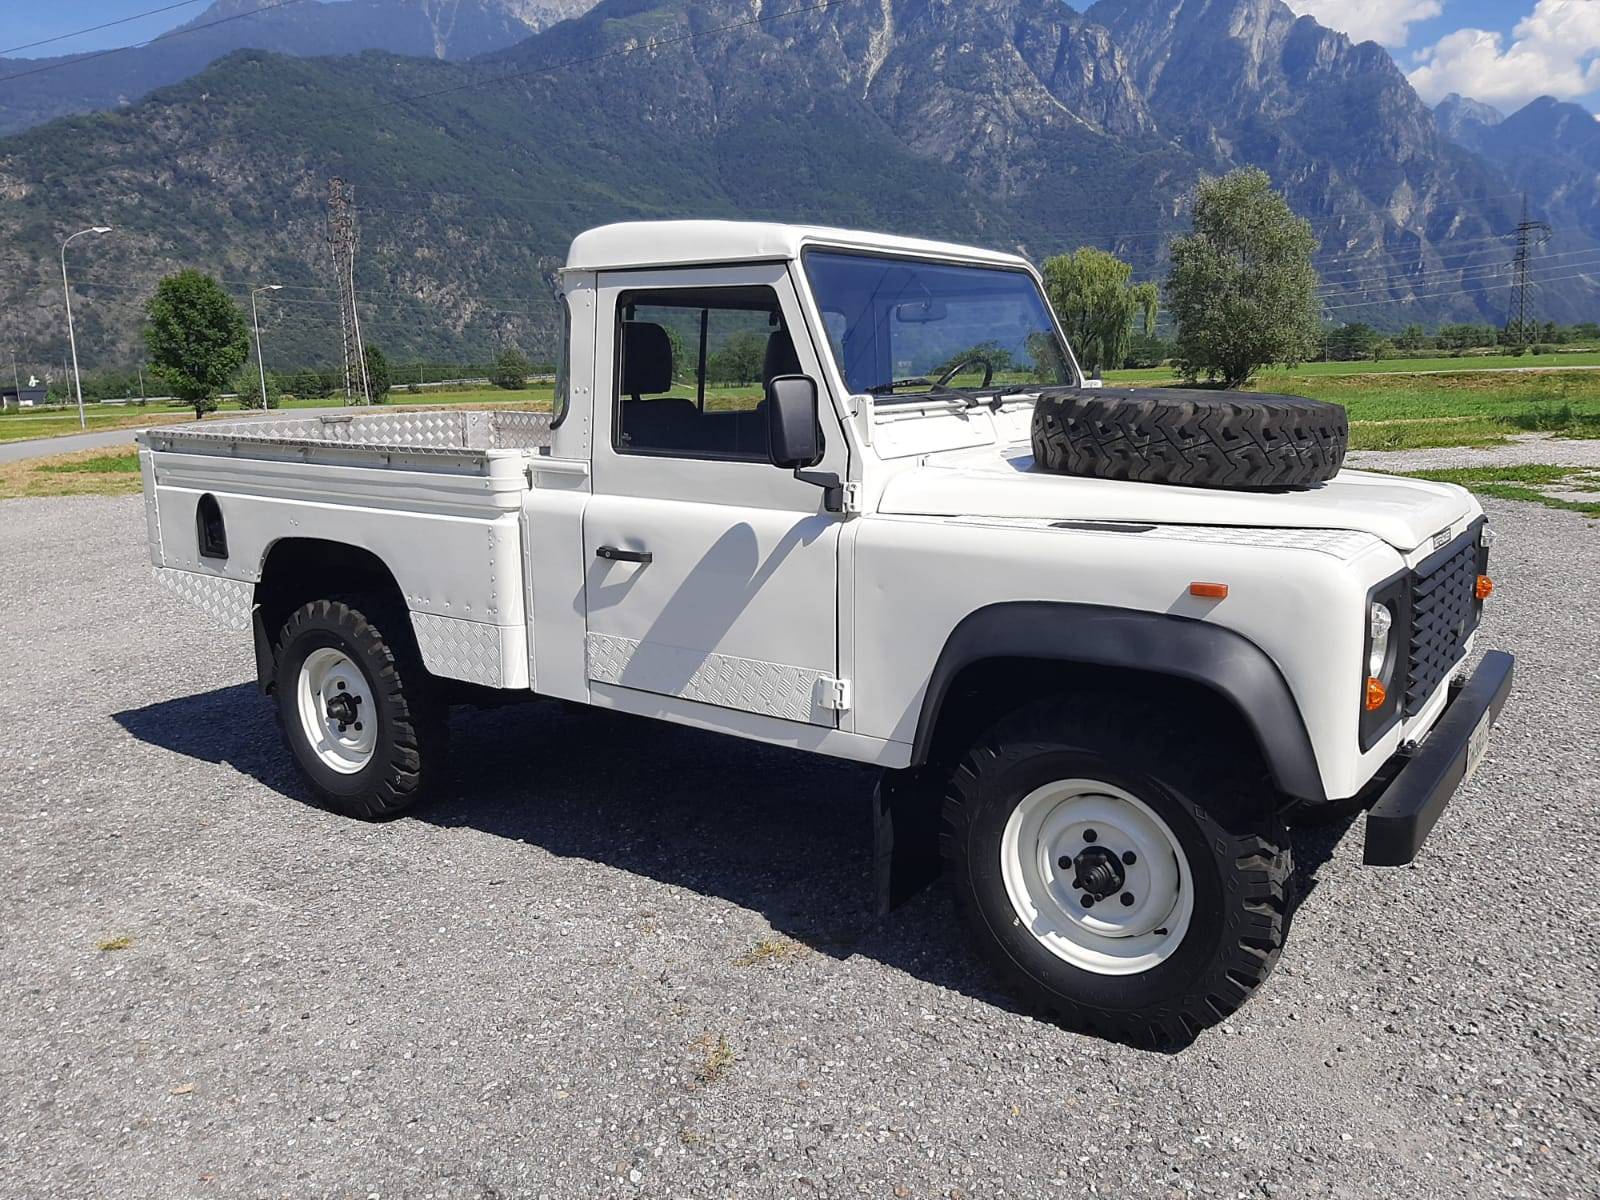 A Turbodiesel Land Rover Defender Pick Up Truck